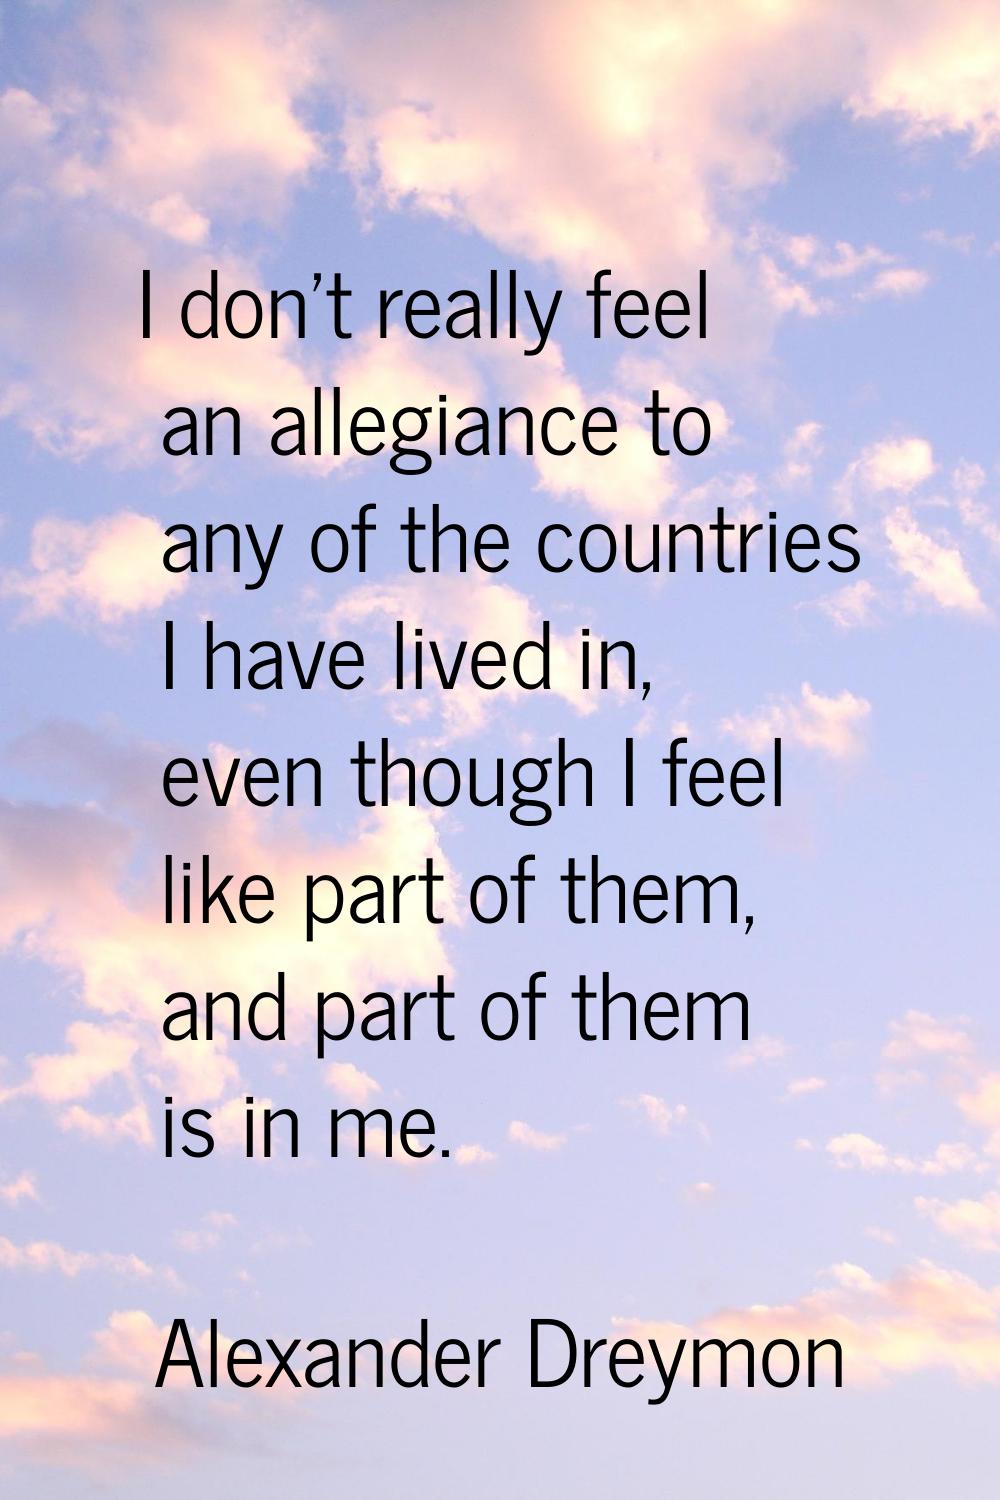 I don't really feel an allegiance to any of the countries I have lived in, even though I feel like 